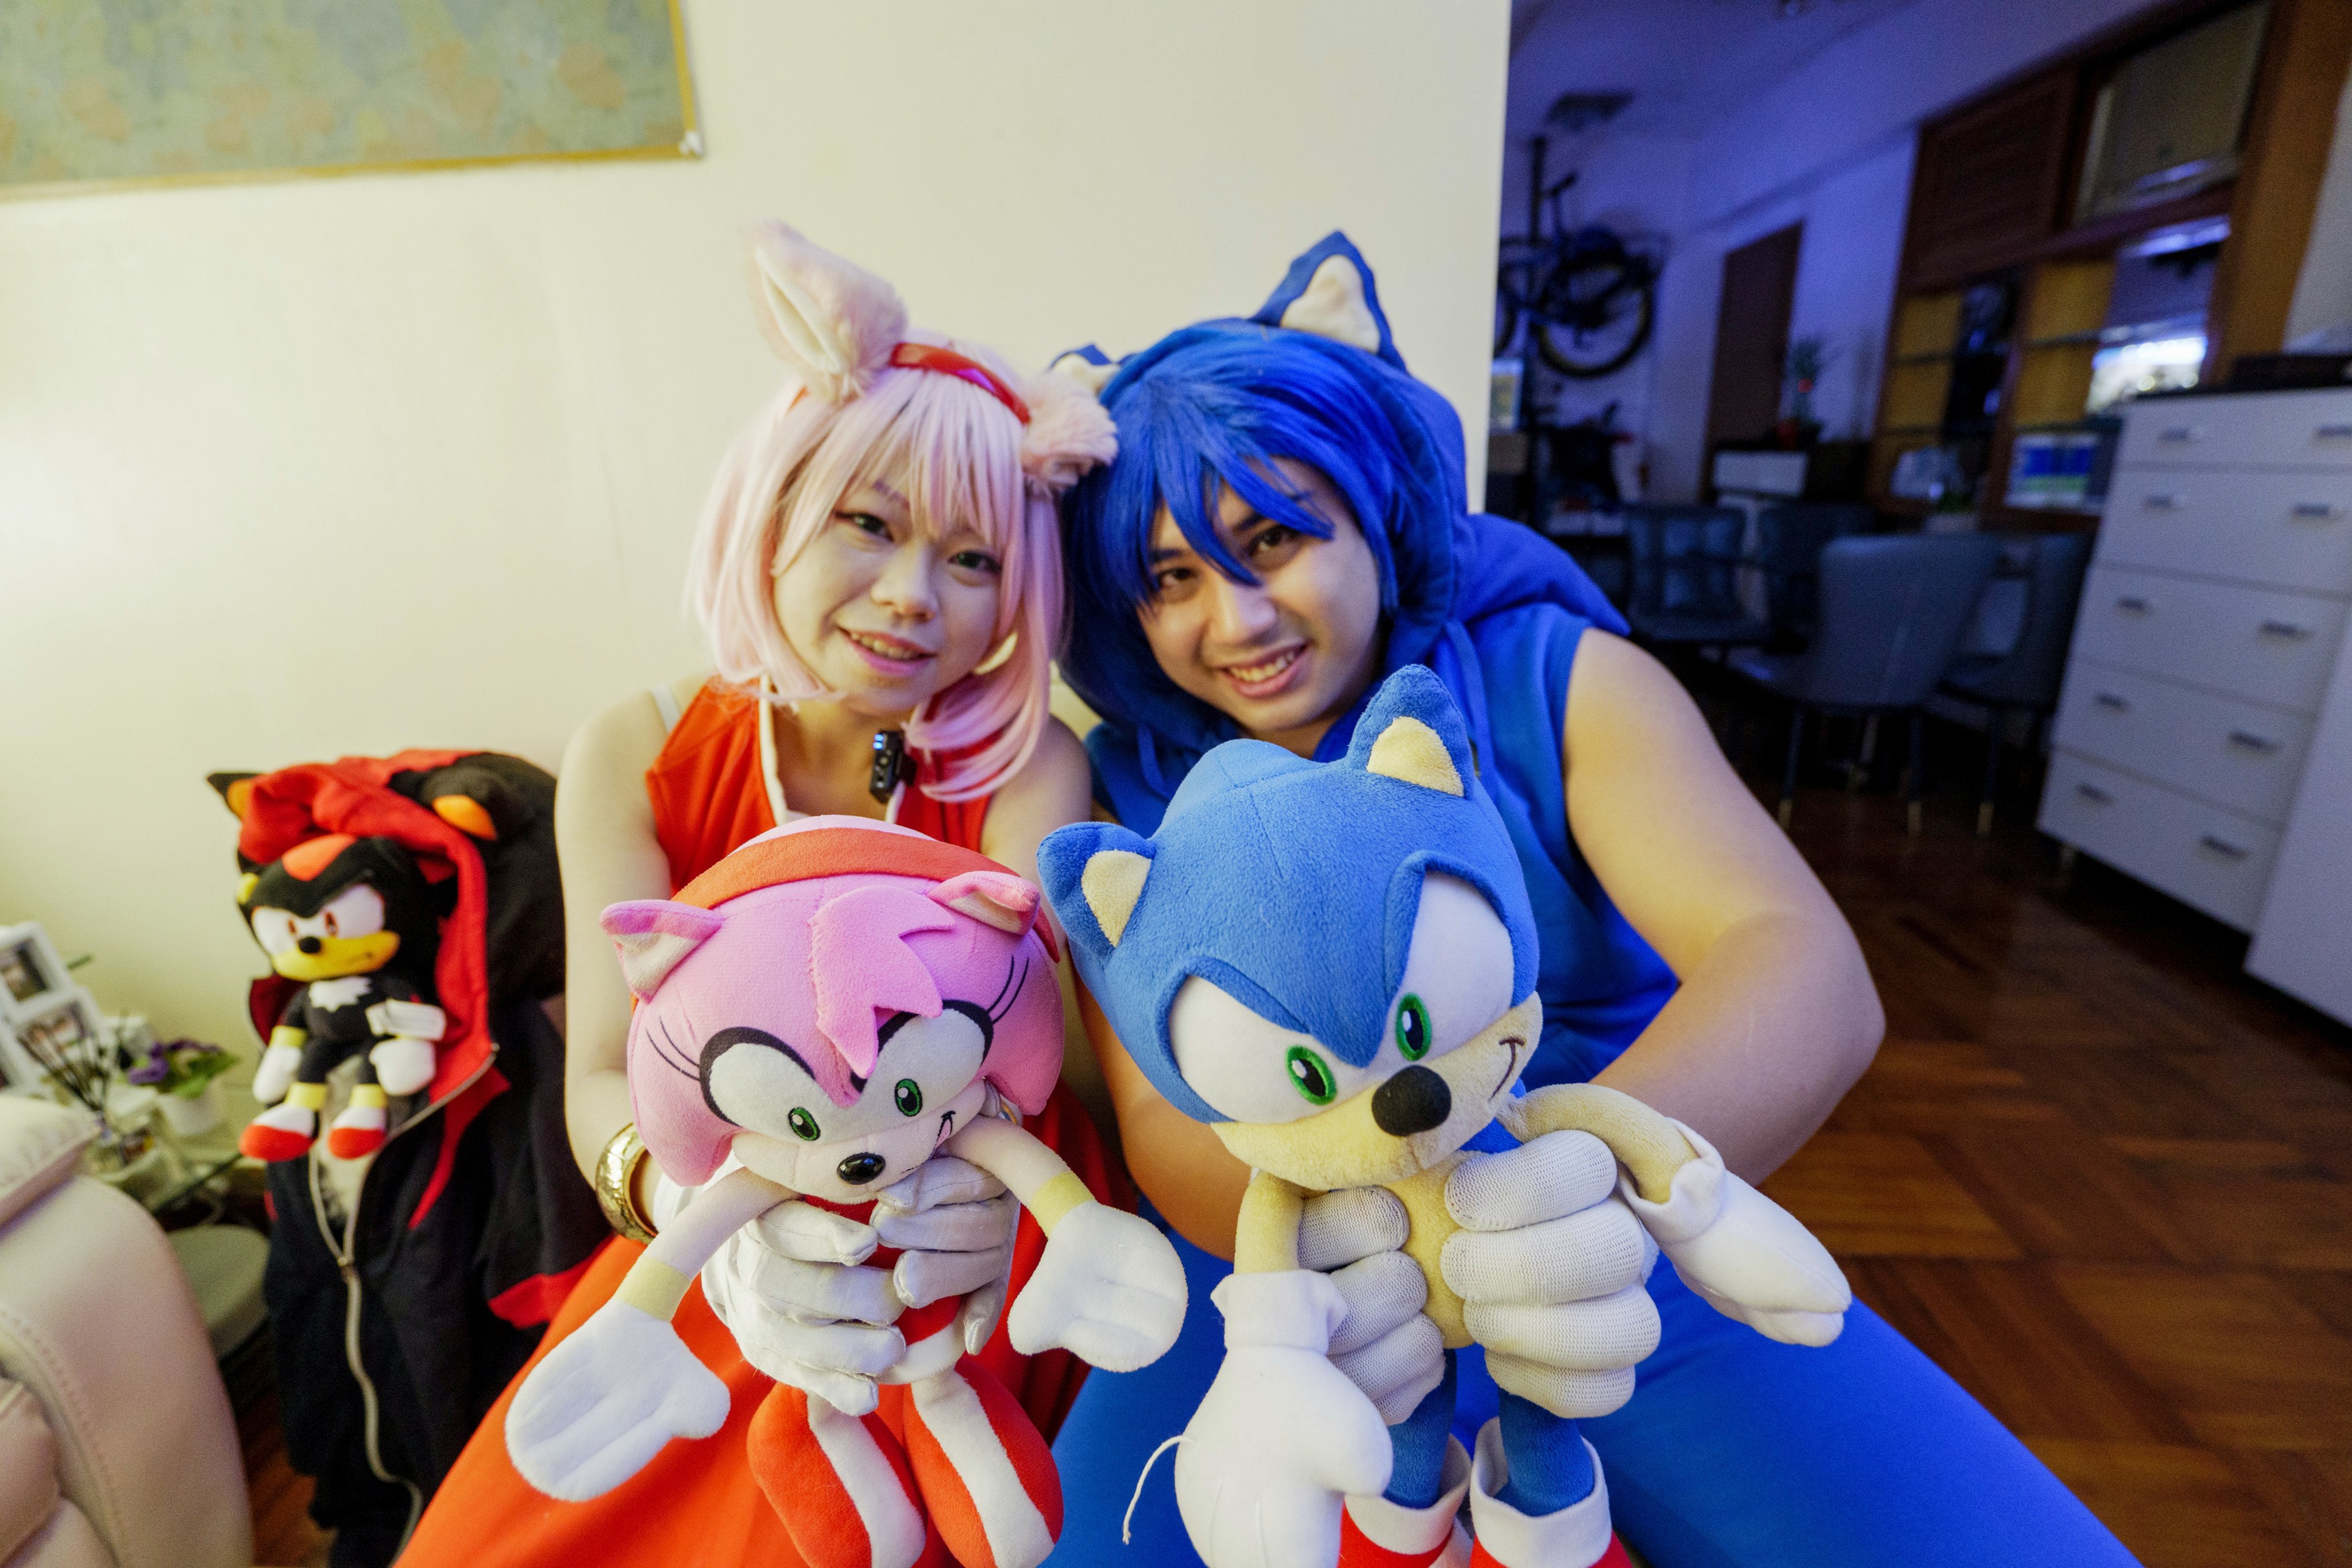 Jayvee Alconaba (right) and his girlfriend Ami Kwok dress as Sonic the Hedgehog and Amy Rose. Photo: Daniel Suen